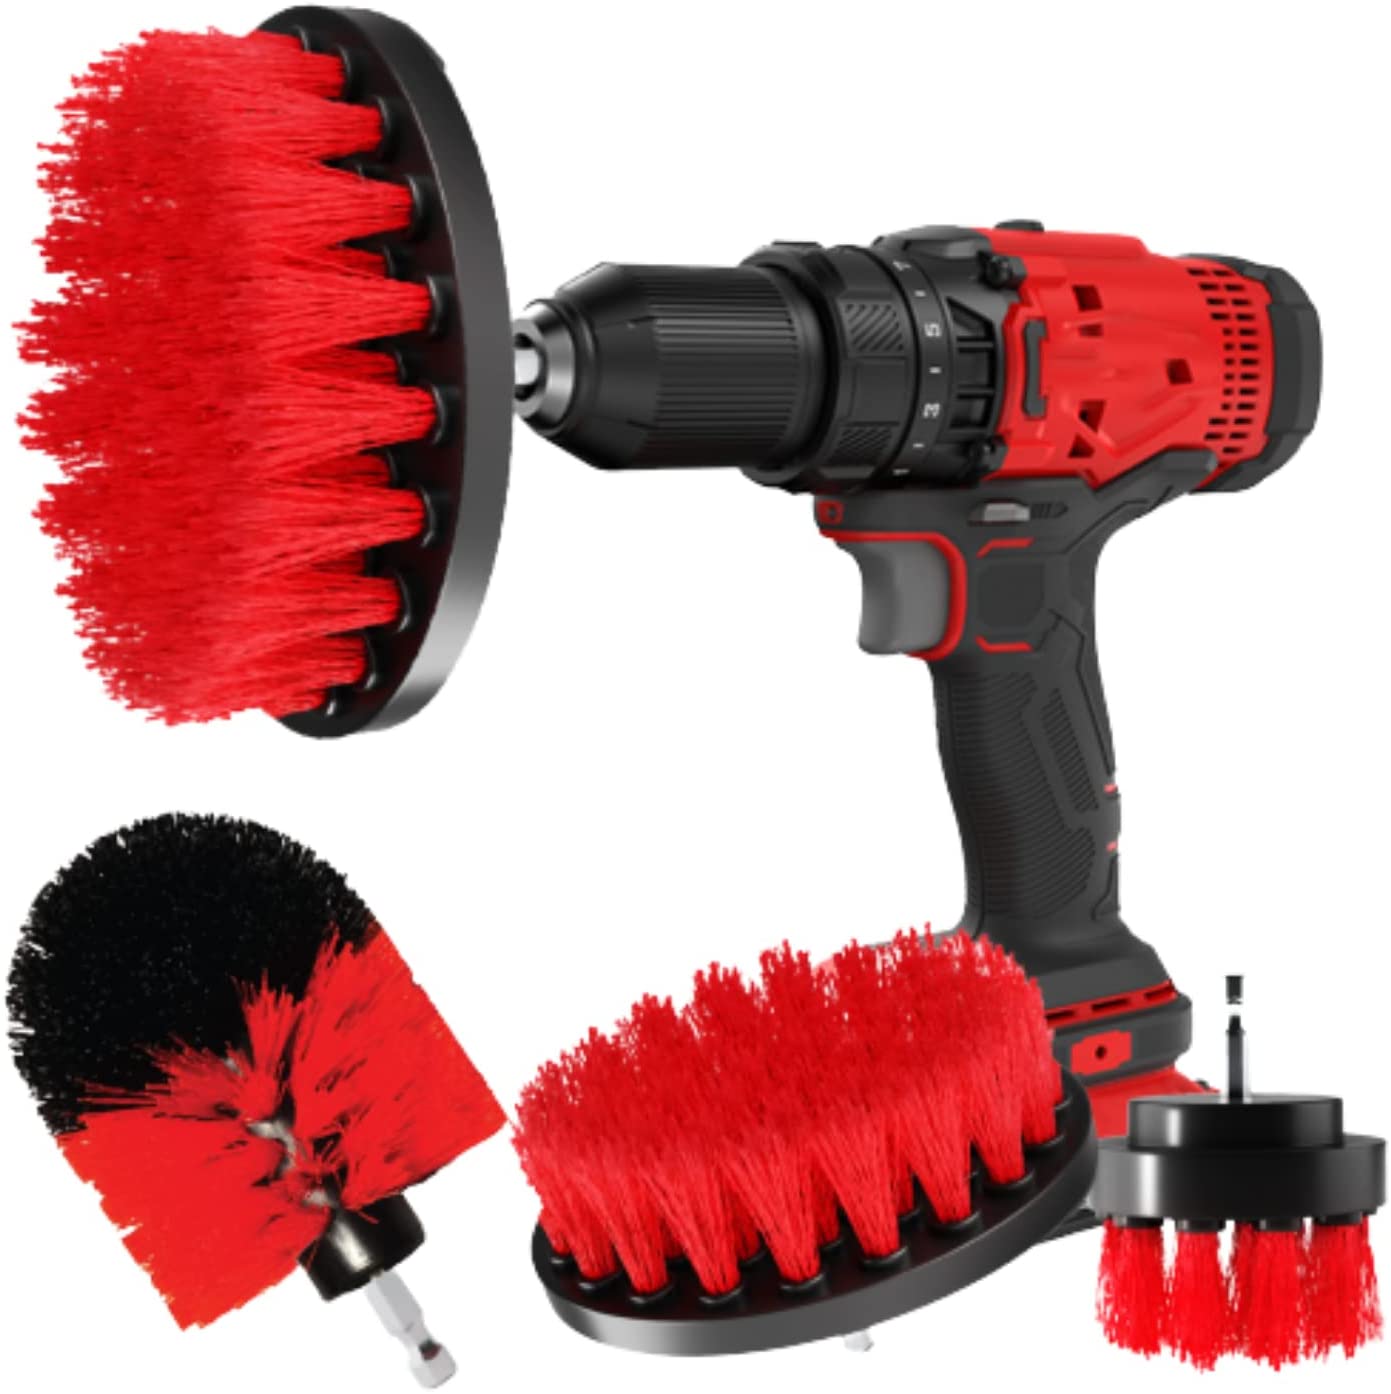 CLEANZOID Nyon Bristled Non-Scratching Drill Brush, 3-Piece